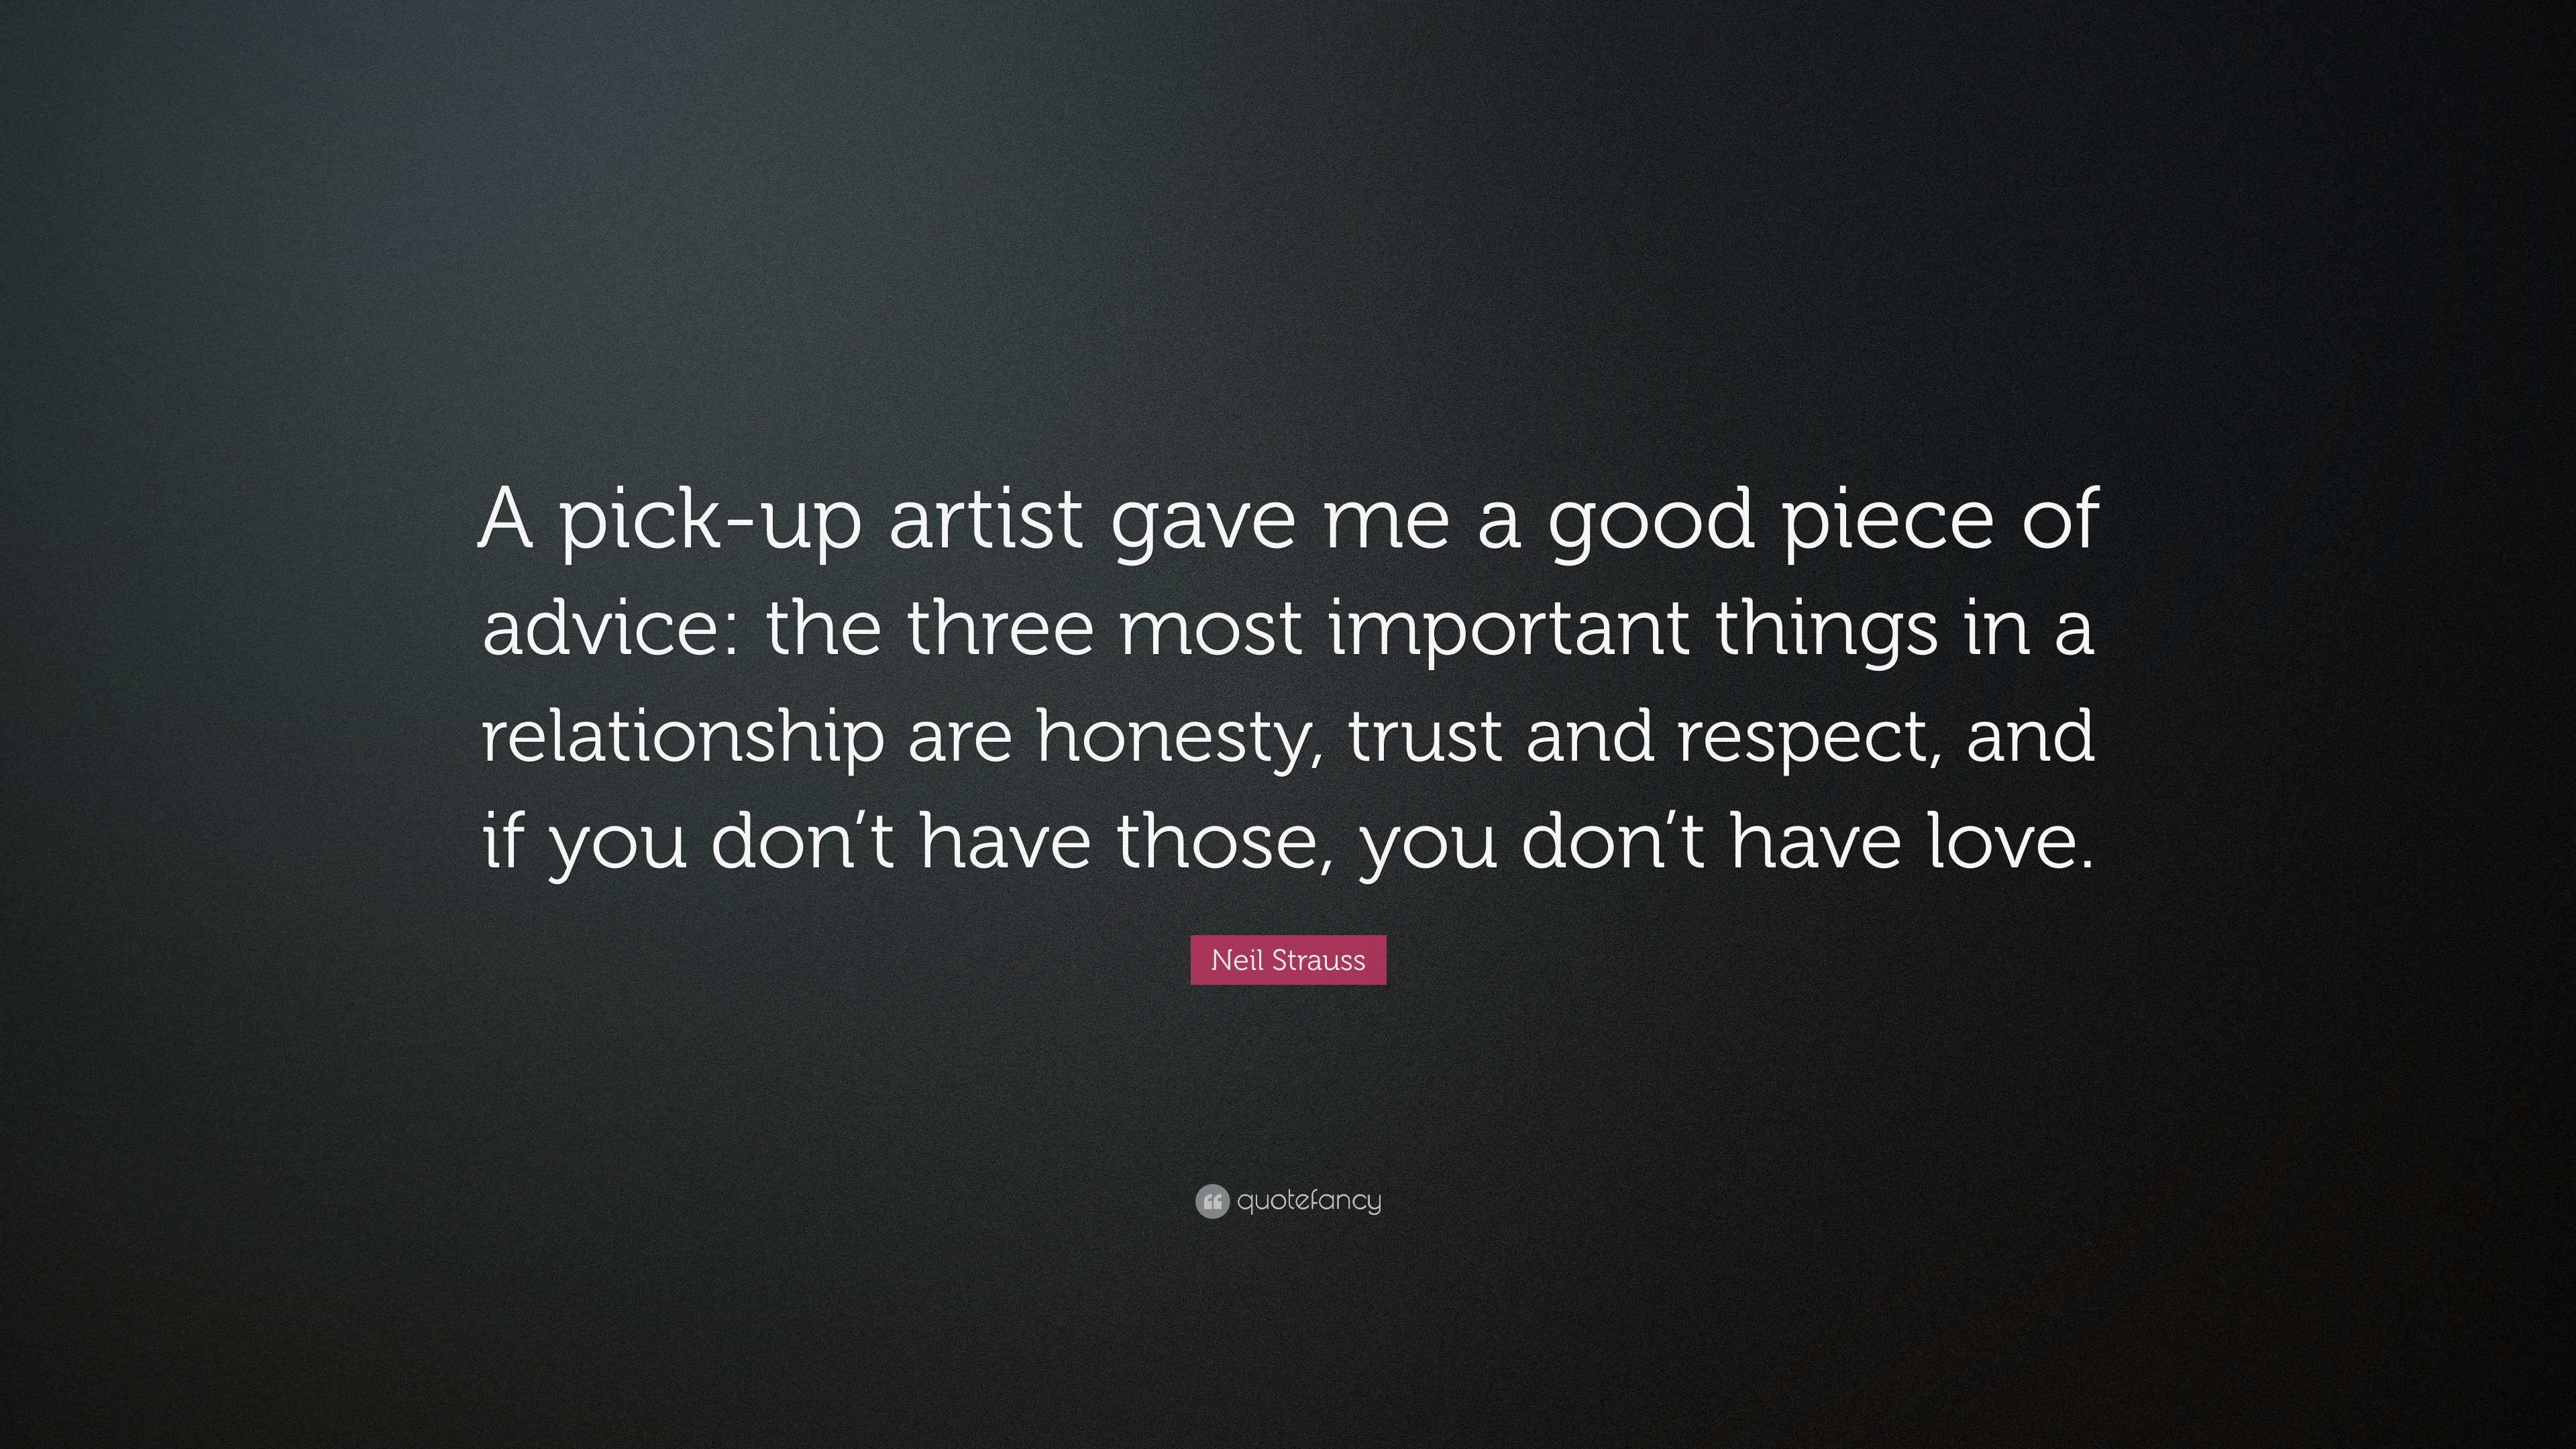 Neil Strauss Quote “A pick up artist gave me a good piece of